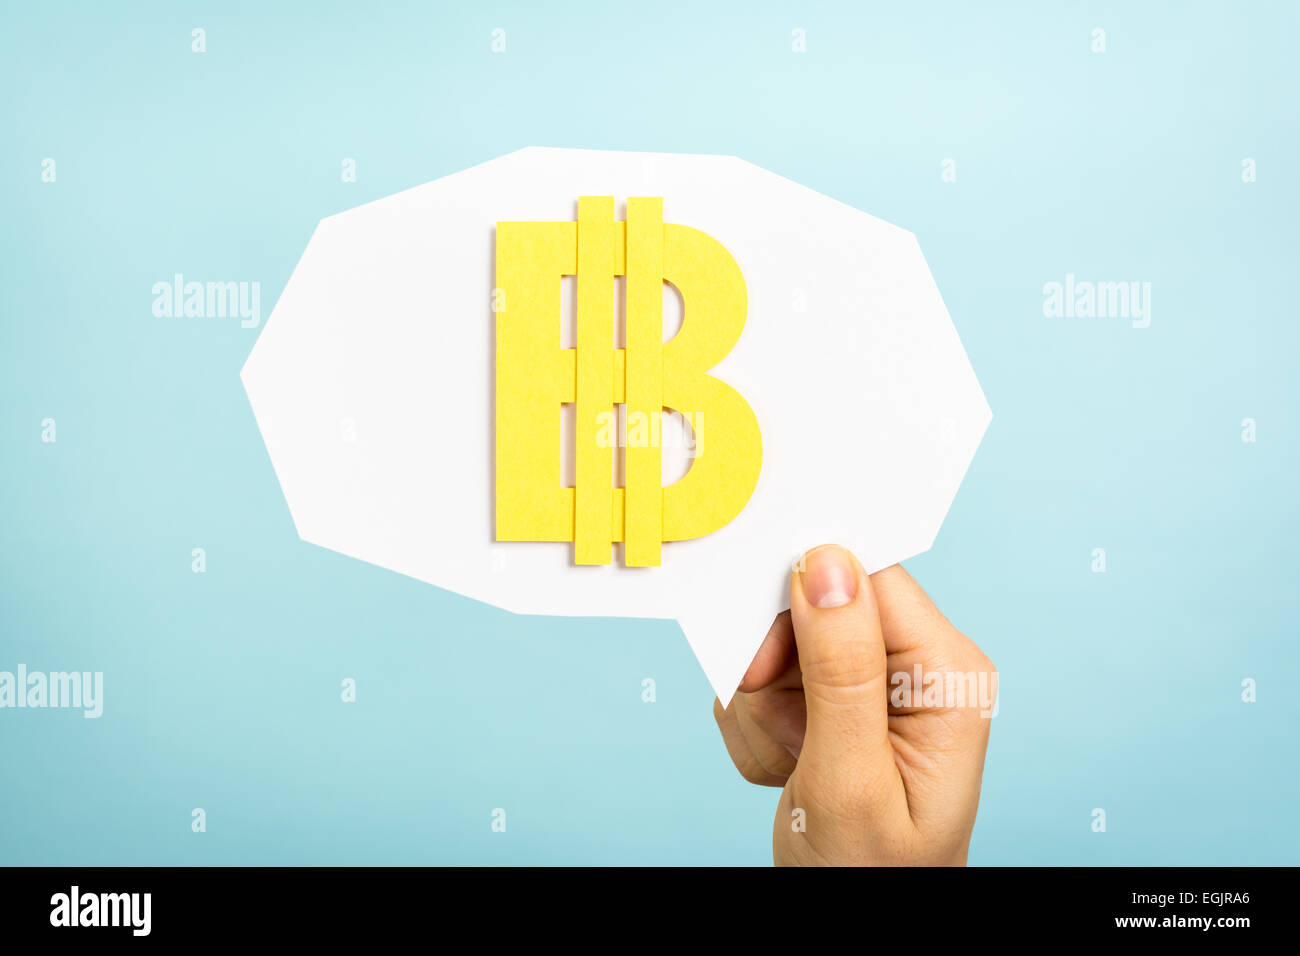 Bitcoin sign/symbol, virtual currency/money on speech bubble and blue background. Stock Photo